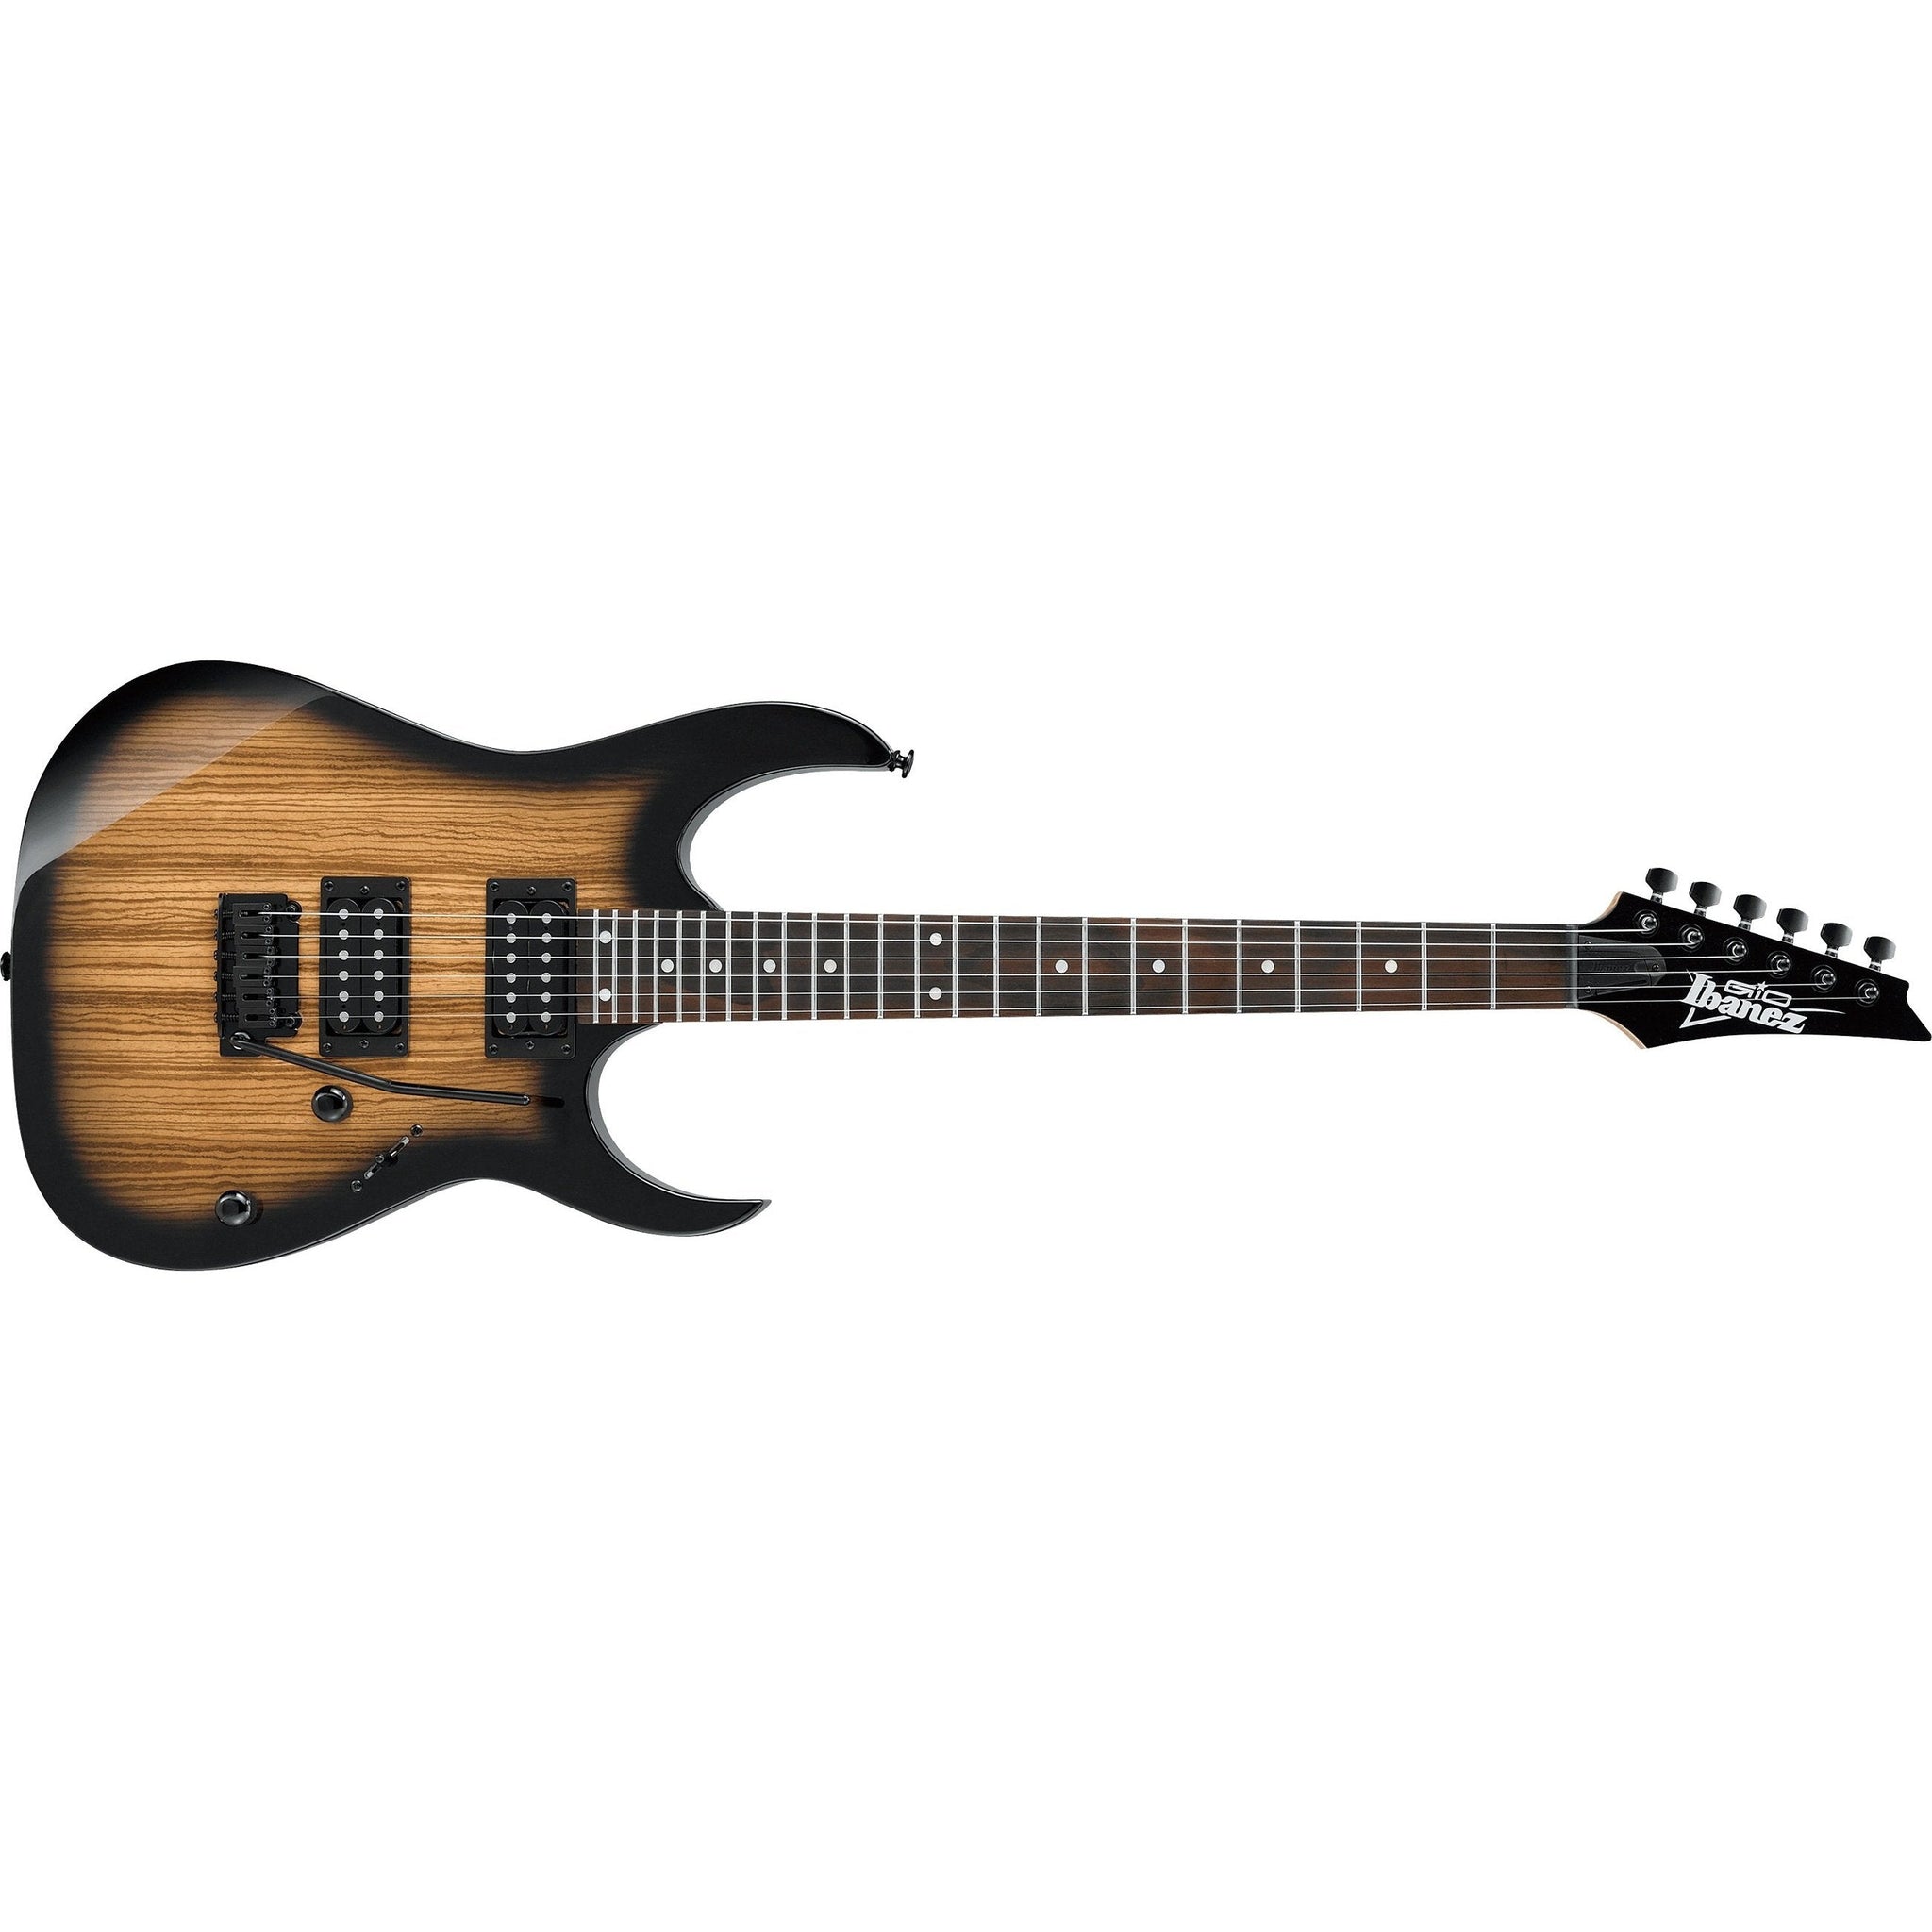 Ibanez GRG120ZW-NGT Gio Series Zebrawood Electric Guitar-Natural Gray Burst (Discontinued)-Music World Academy